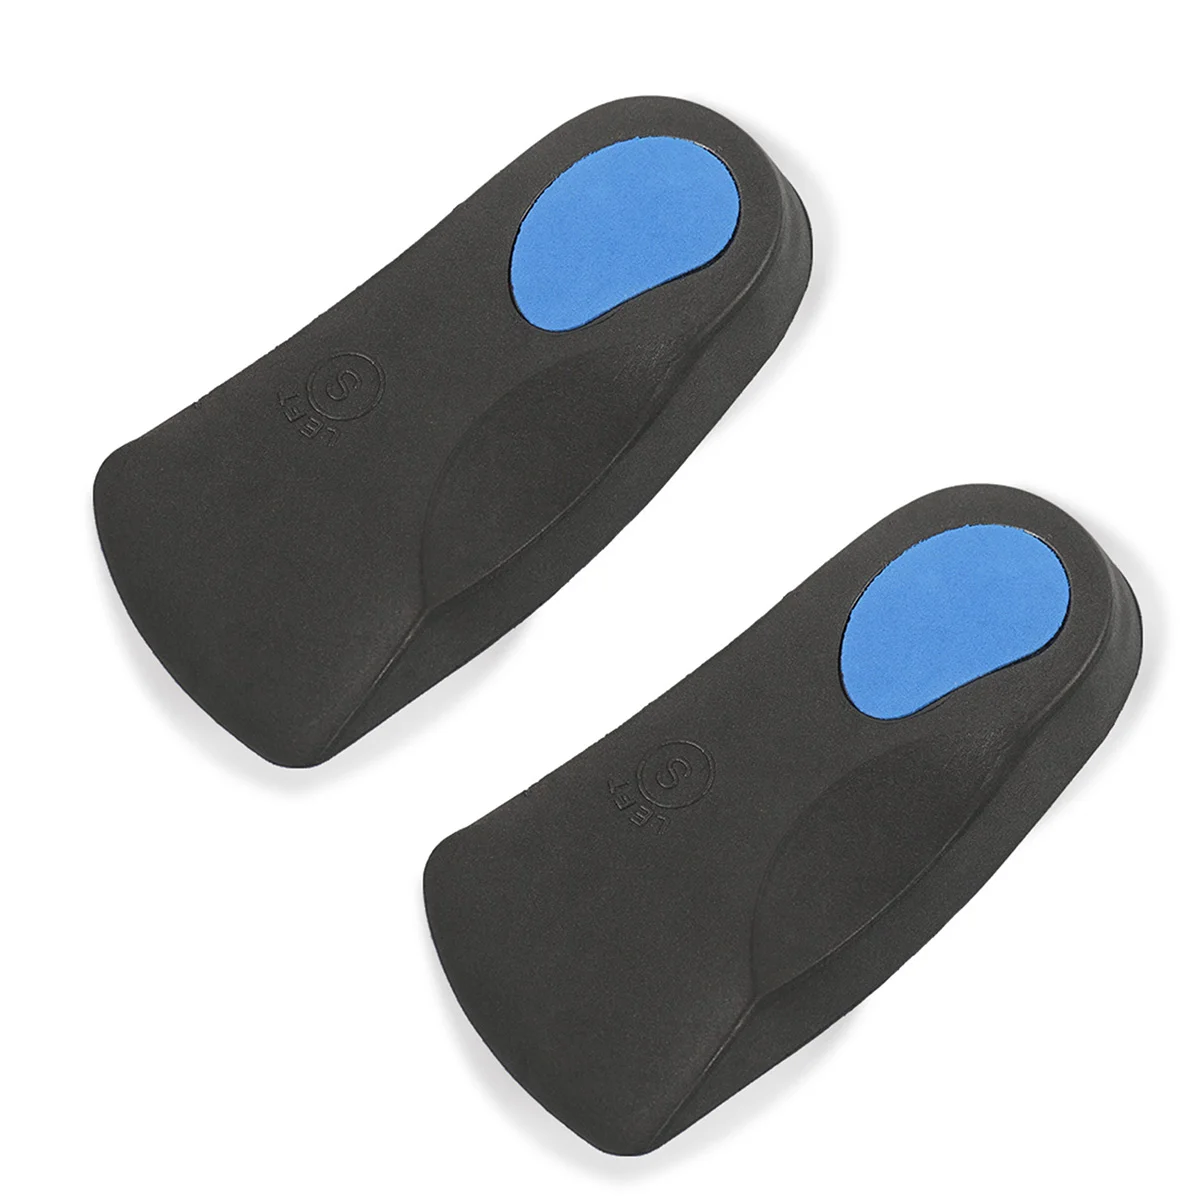 

Arch Support Insoles Pads Shoe High Fasciitis Orthotic Plantar Inserts Flat Foot Shoes Feet Pad Metatarsal Insole Women Eva